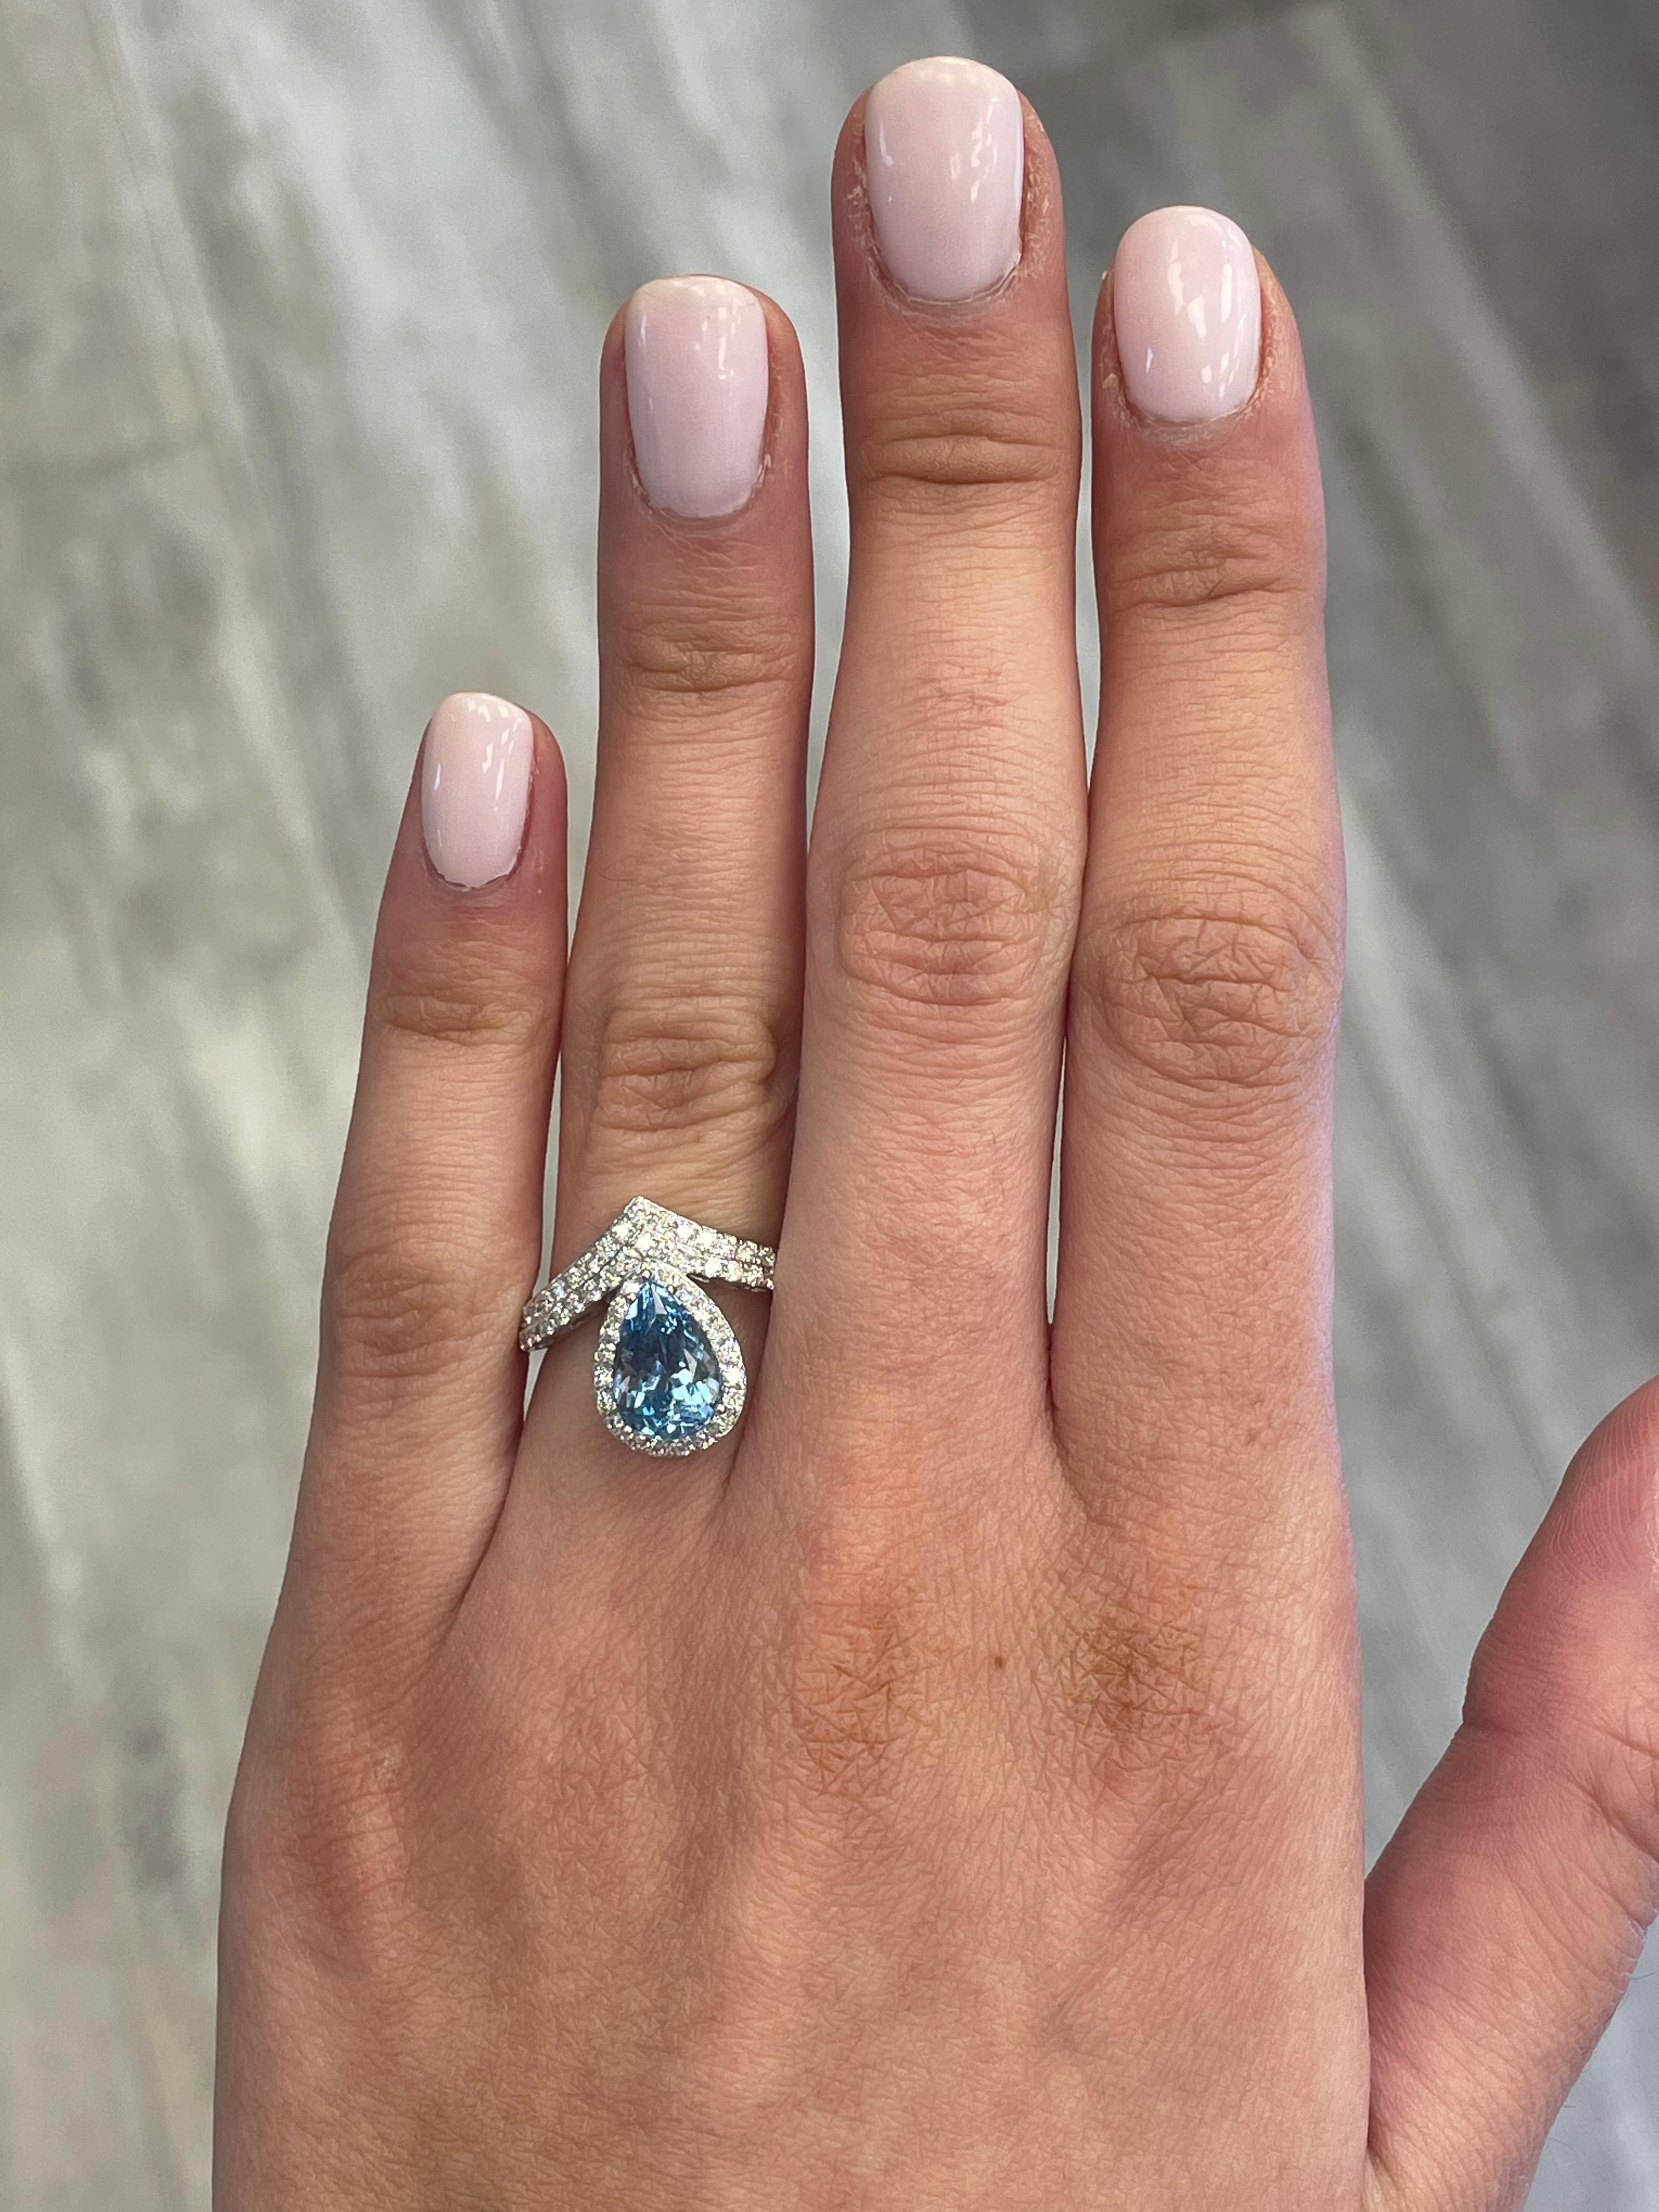 Stunning aquamarine and diamond ring with halo, by Alexander Beverly Hills.
1 pear aquamarine, 2.03 carats. Complimented by 62 round brilliant diamonds, 0.63 carats. Approximately D-F color and SI clarity. 18-karat white gold, 4.04 grams, 6 ring